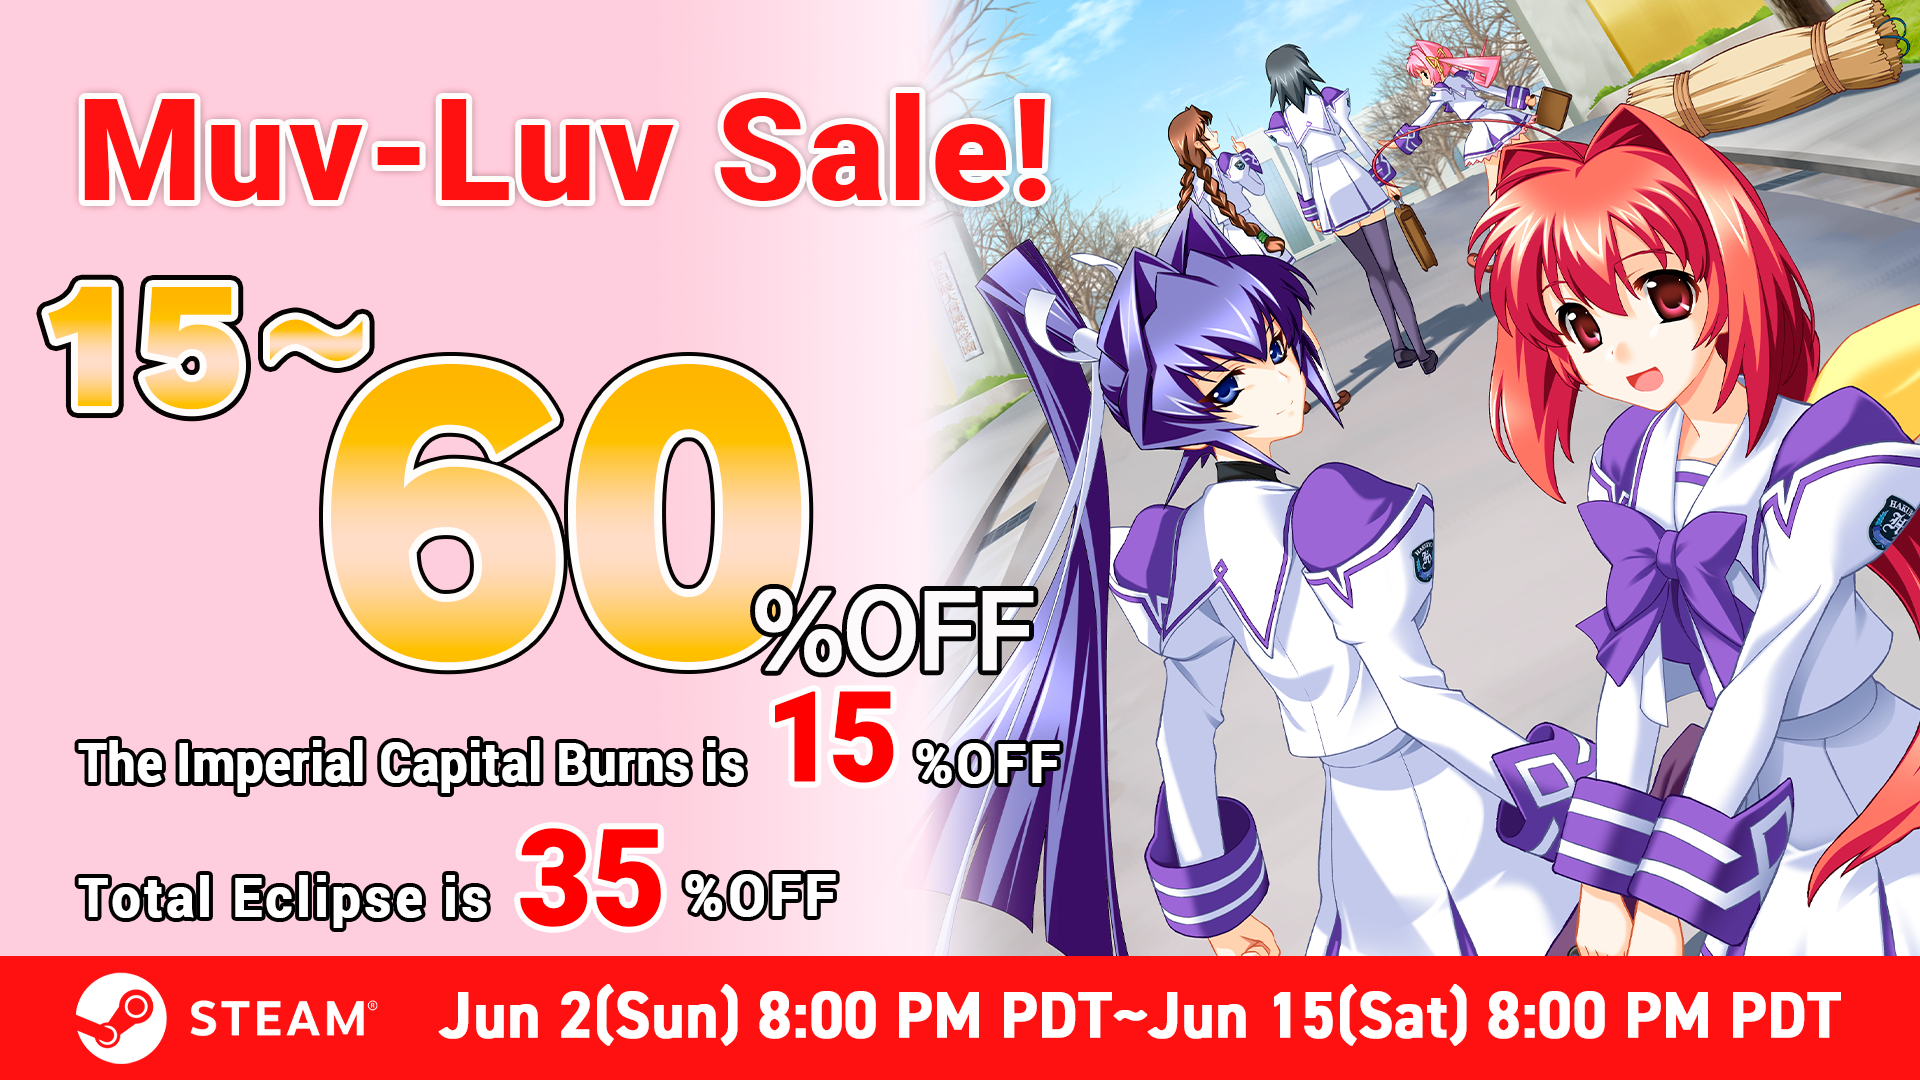 The Muv-Luv Series is up to 60% Off!